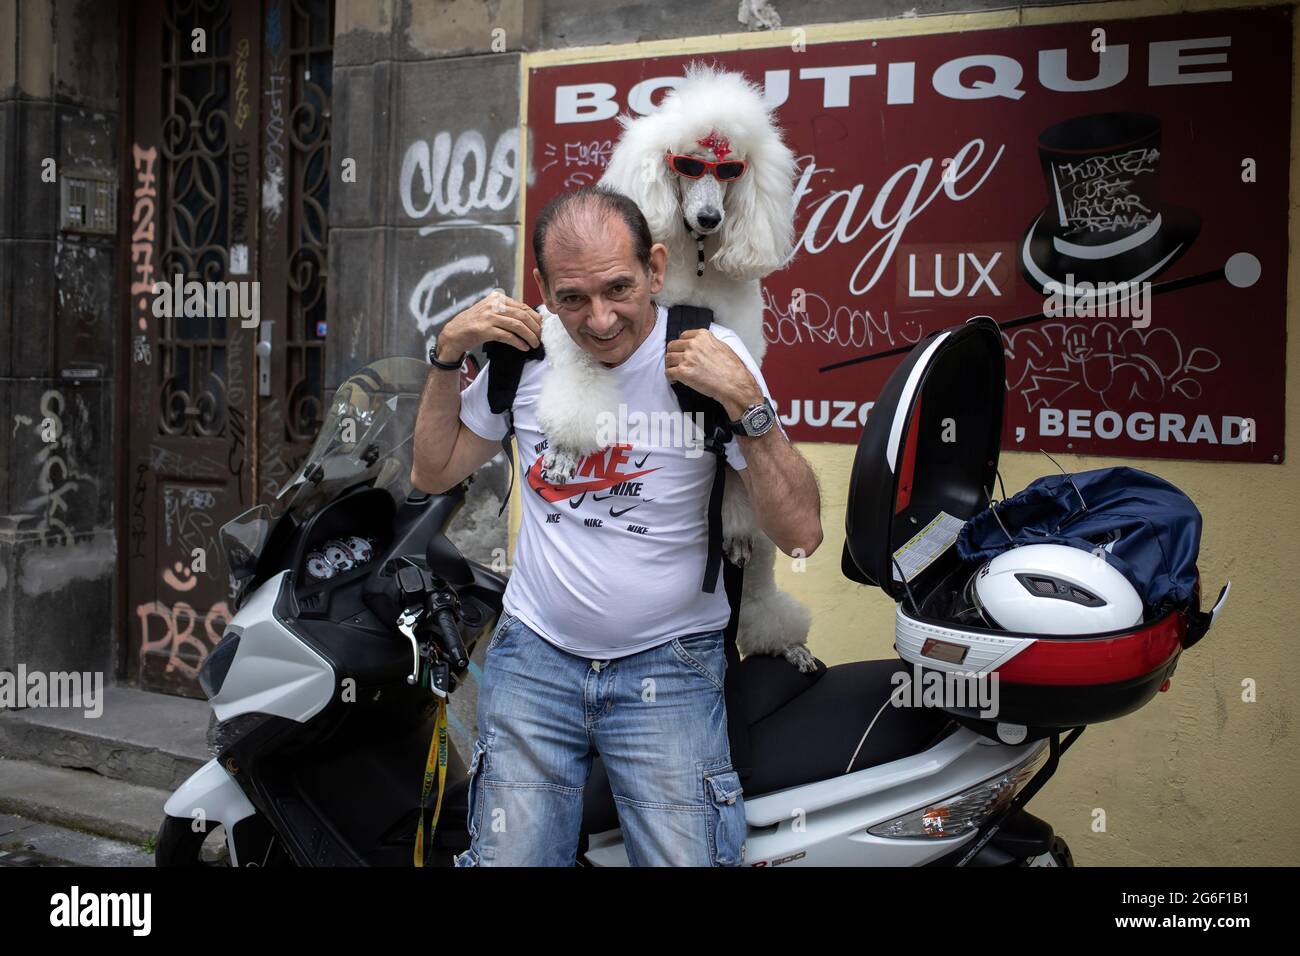 Belgrade, Serbia, July 3, 2021: Zaza the Royal Poodle and her owner dismounting a motorcycle after ride Stock Photo